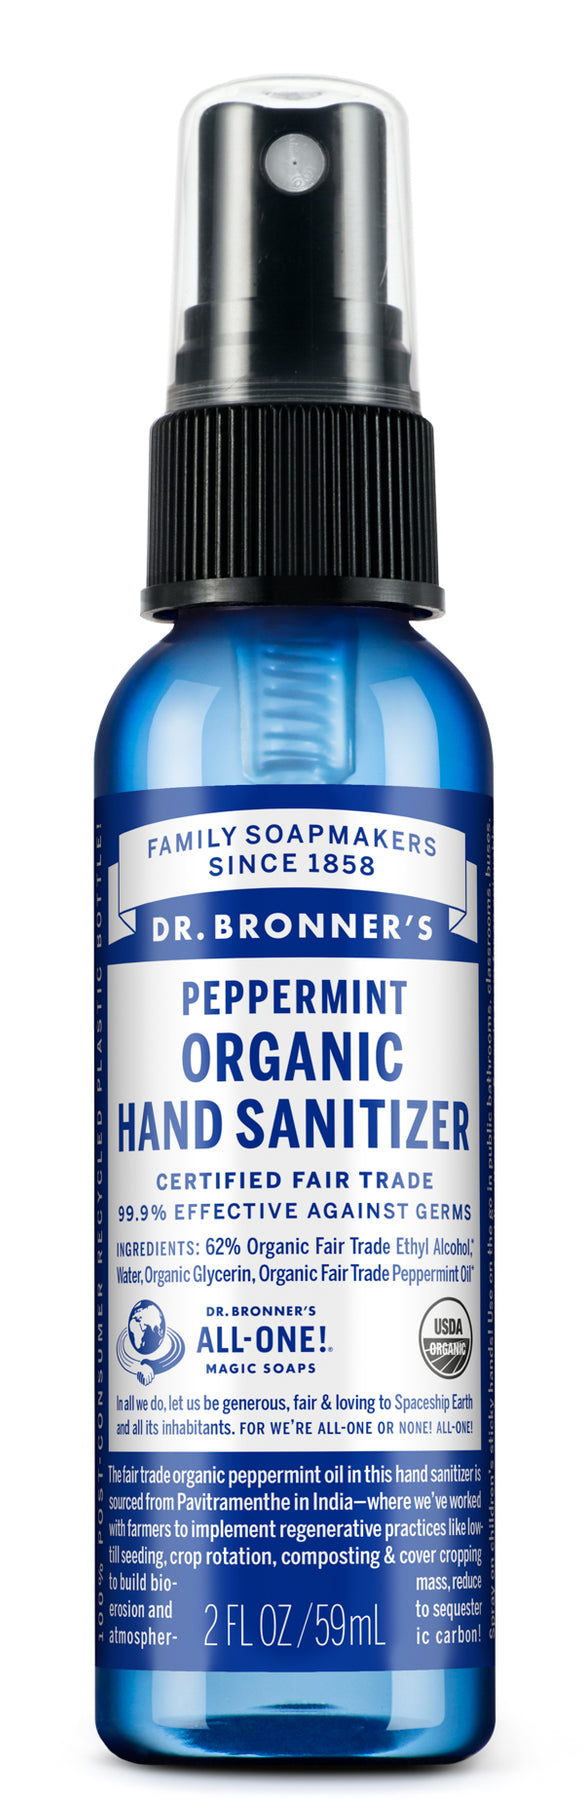 Reduced-price hand sanitizers